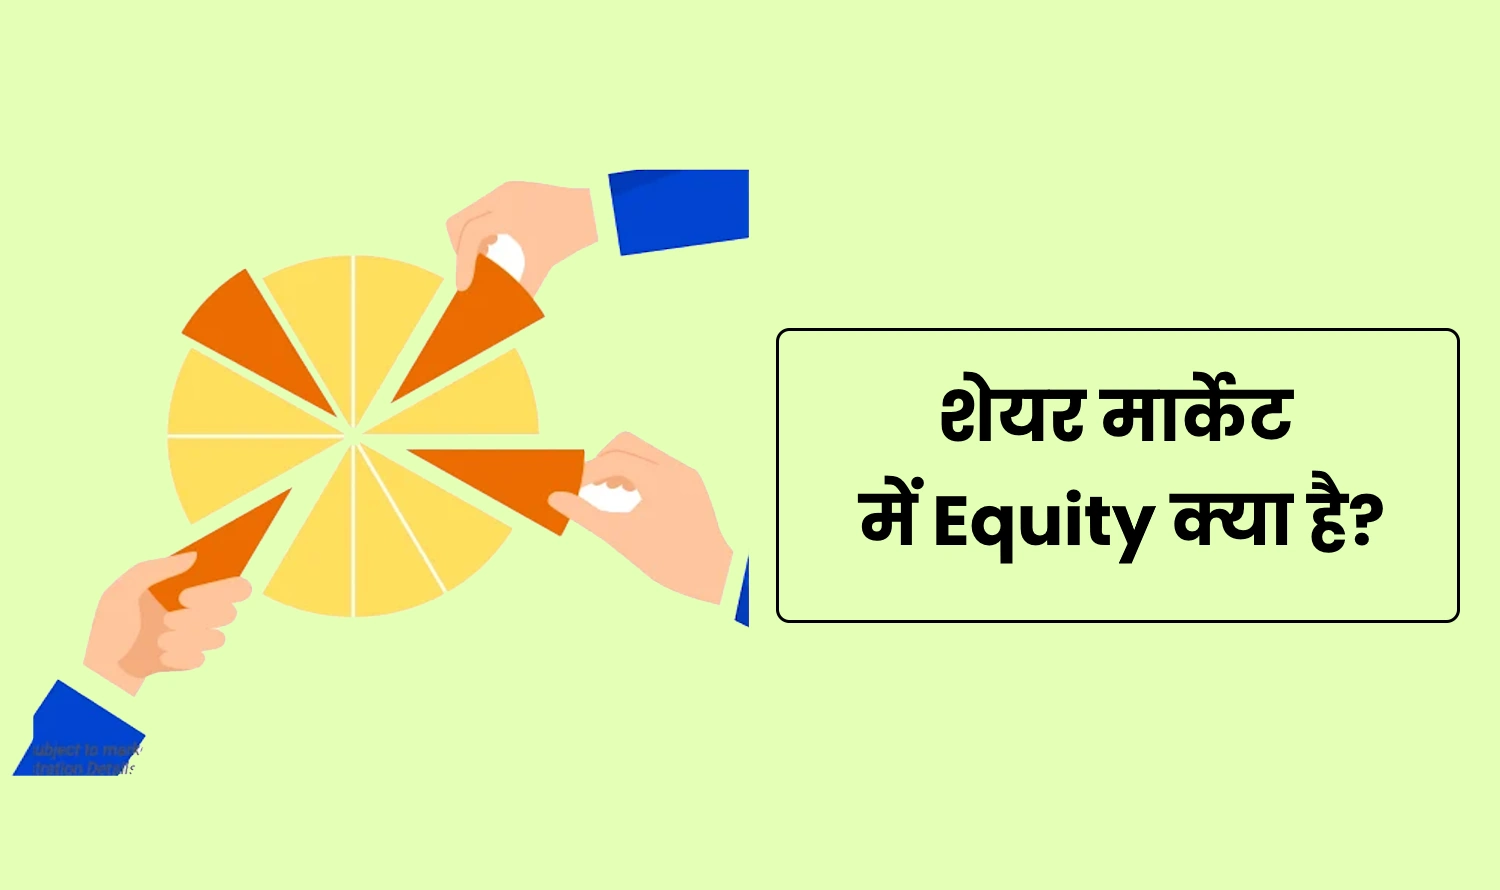 Equity Meaning in Hindi